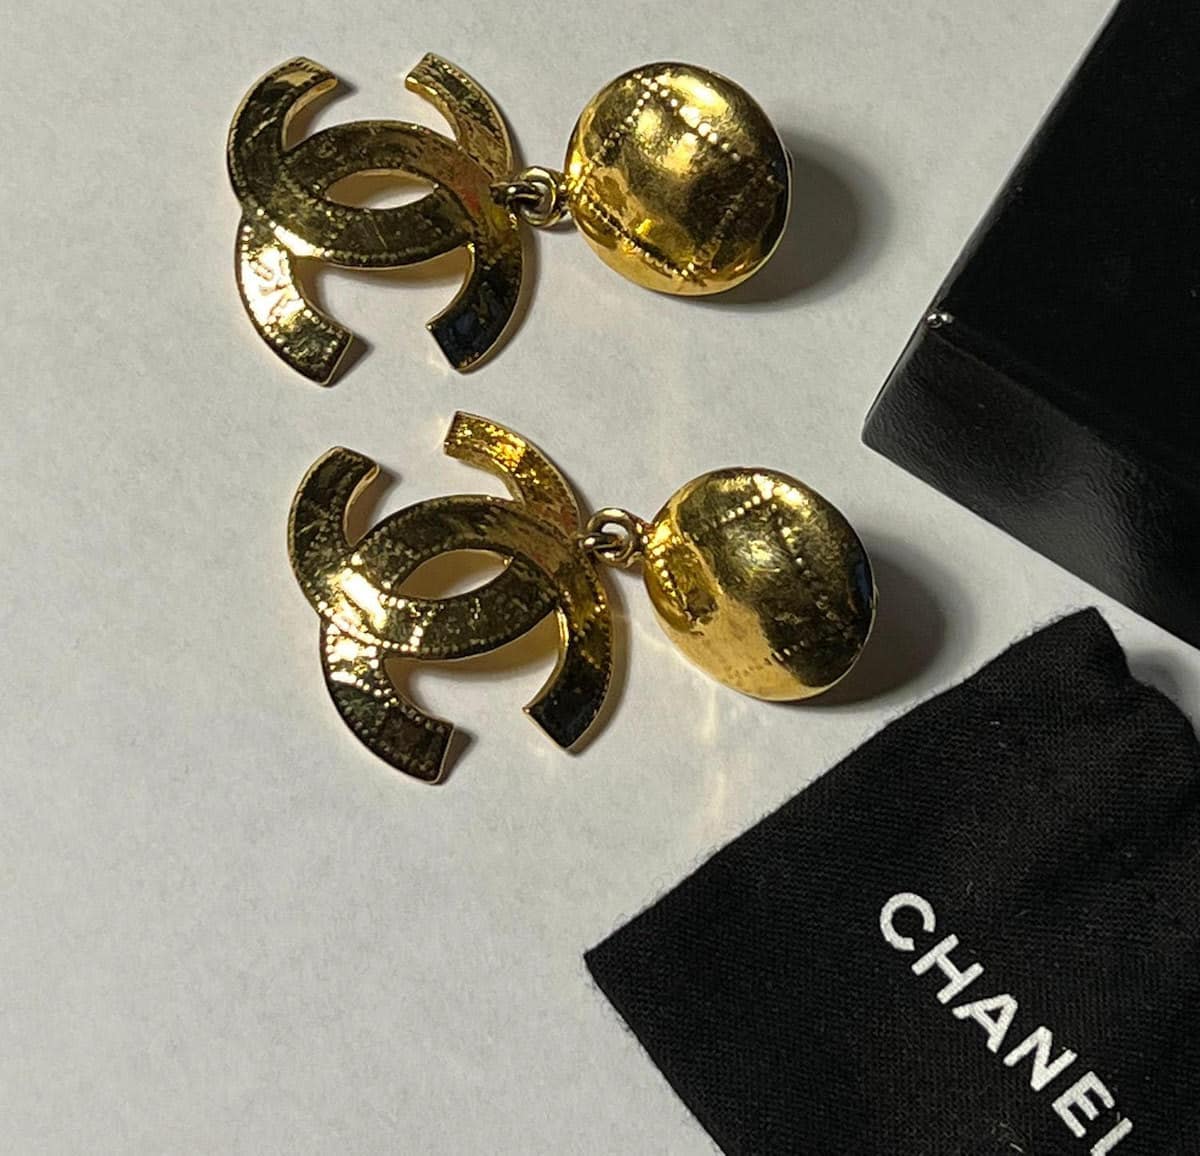 CHANEL CC LOGO LARGE ROUND GOLD LION CLIP ON EARRINGS - VINTAGE